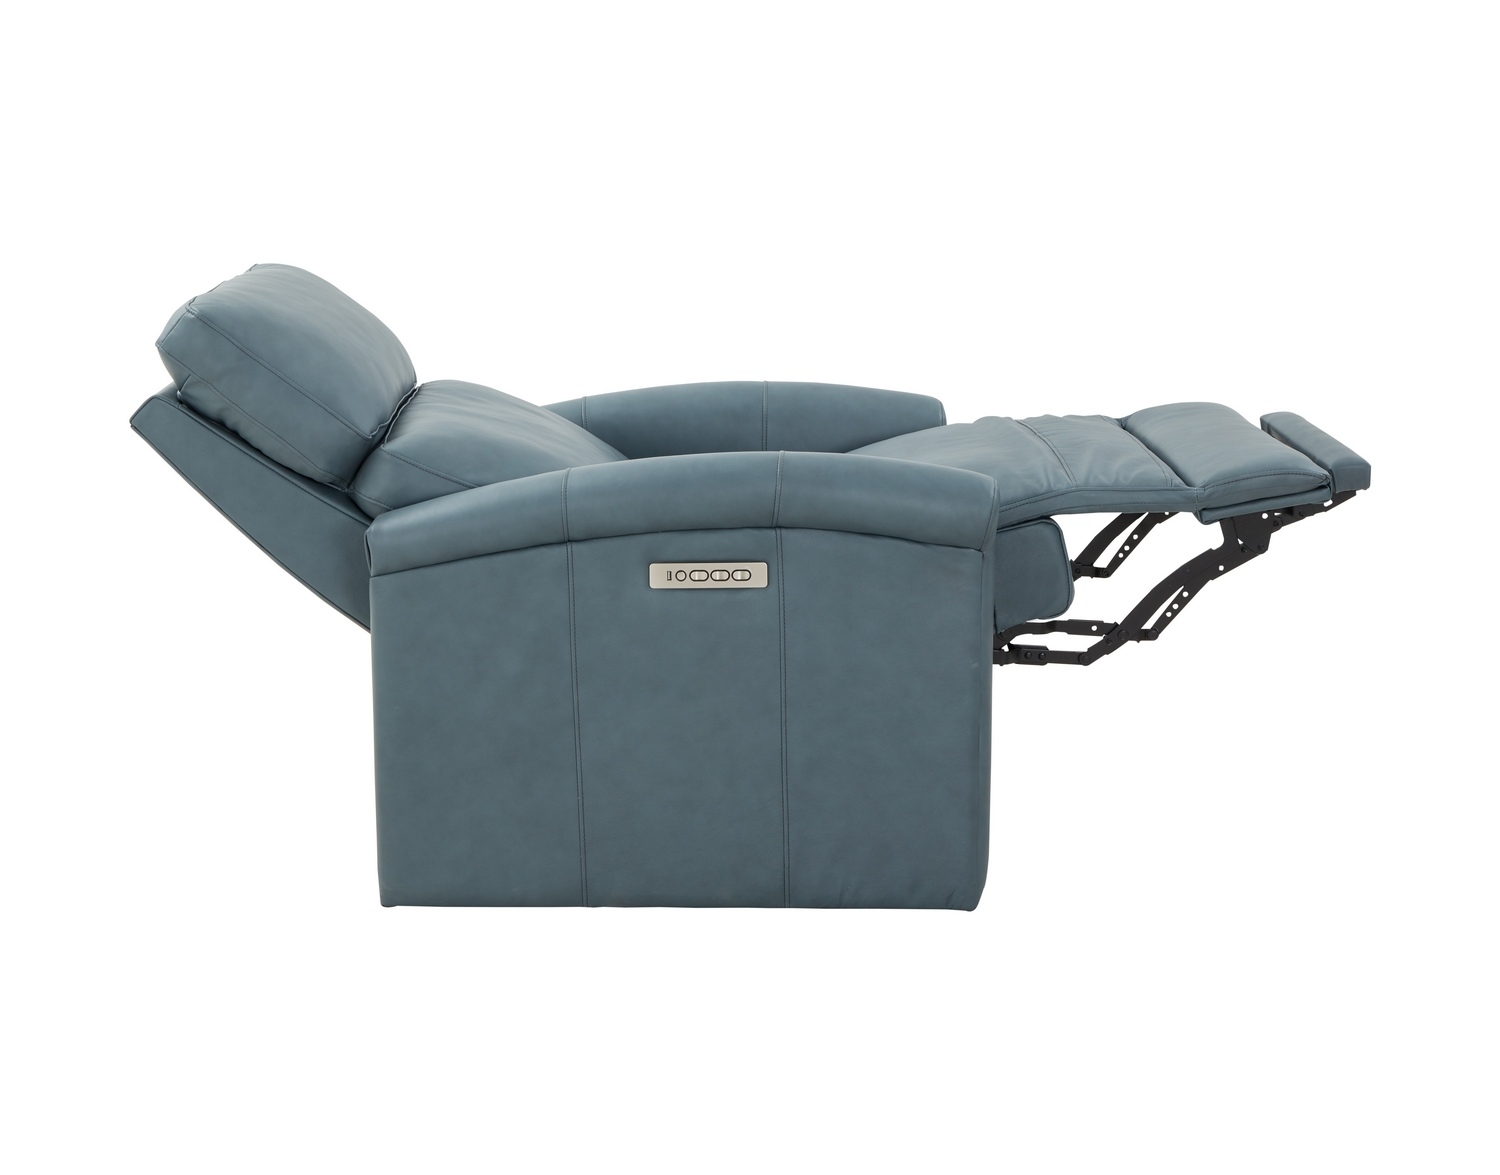 Barcalounger Jaxon Zero Gravity Power Recliner Chair with Power Head Rest and Lumbar - Corbett Steel Gray/All Leather